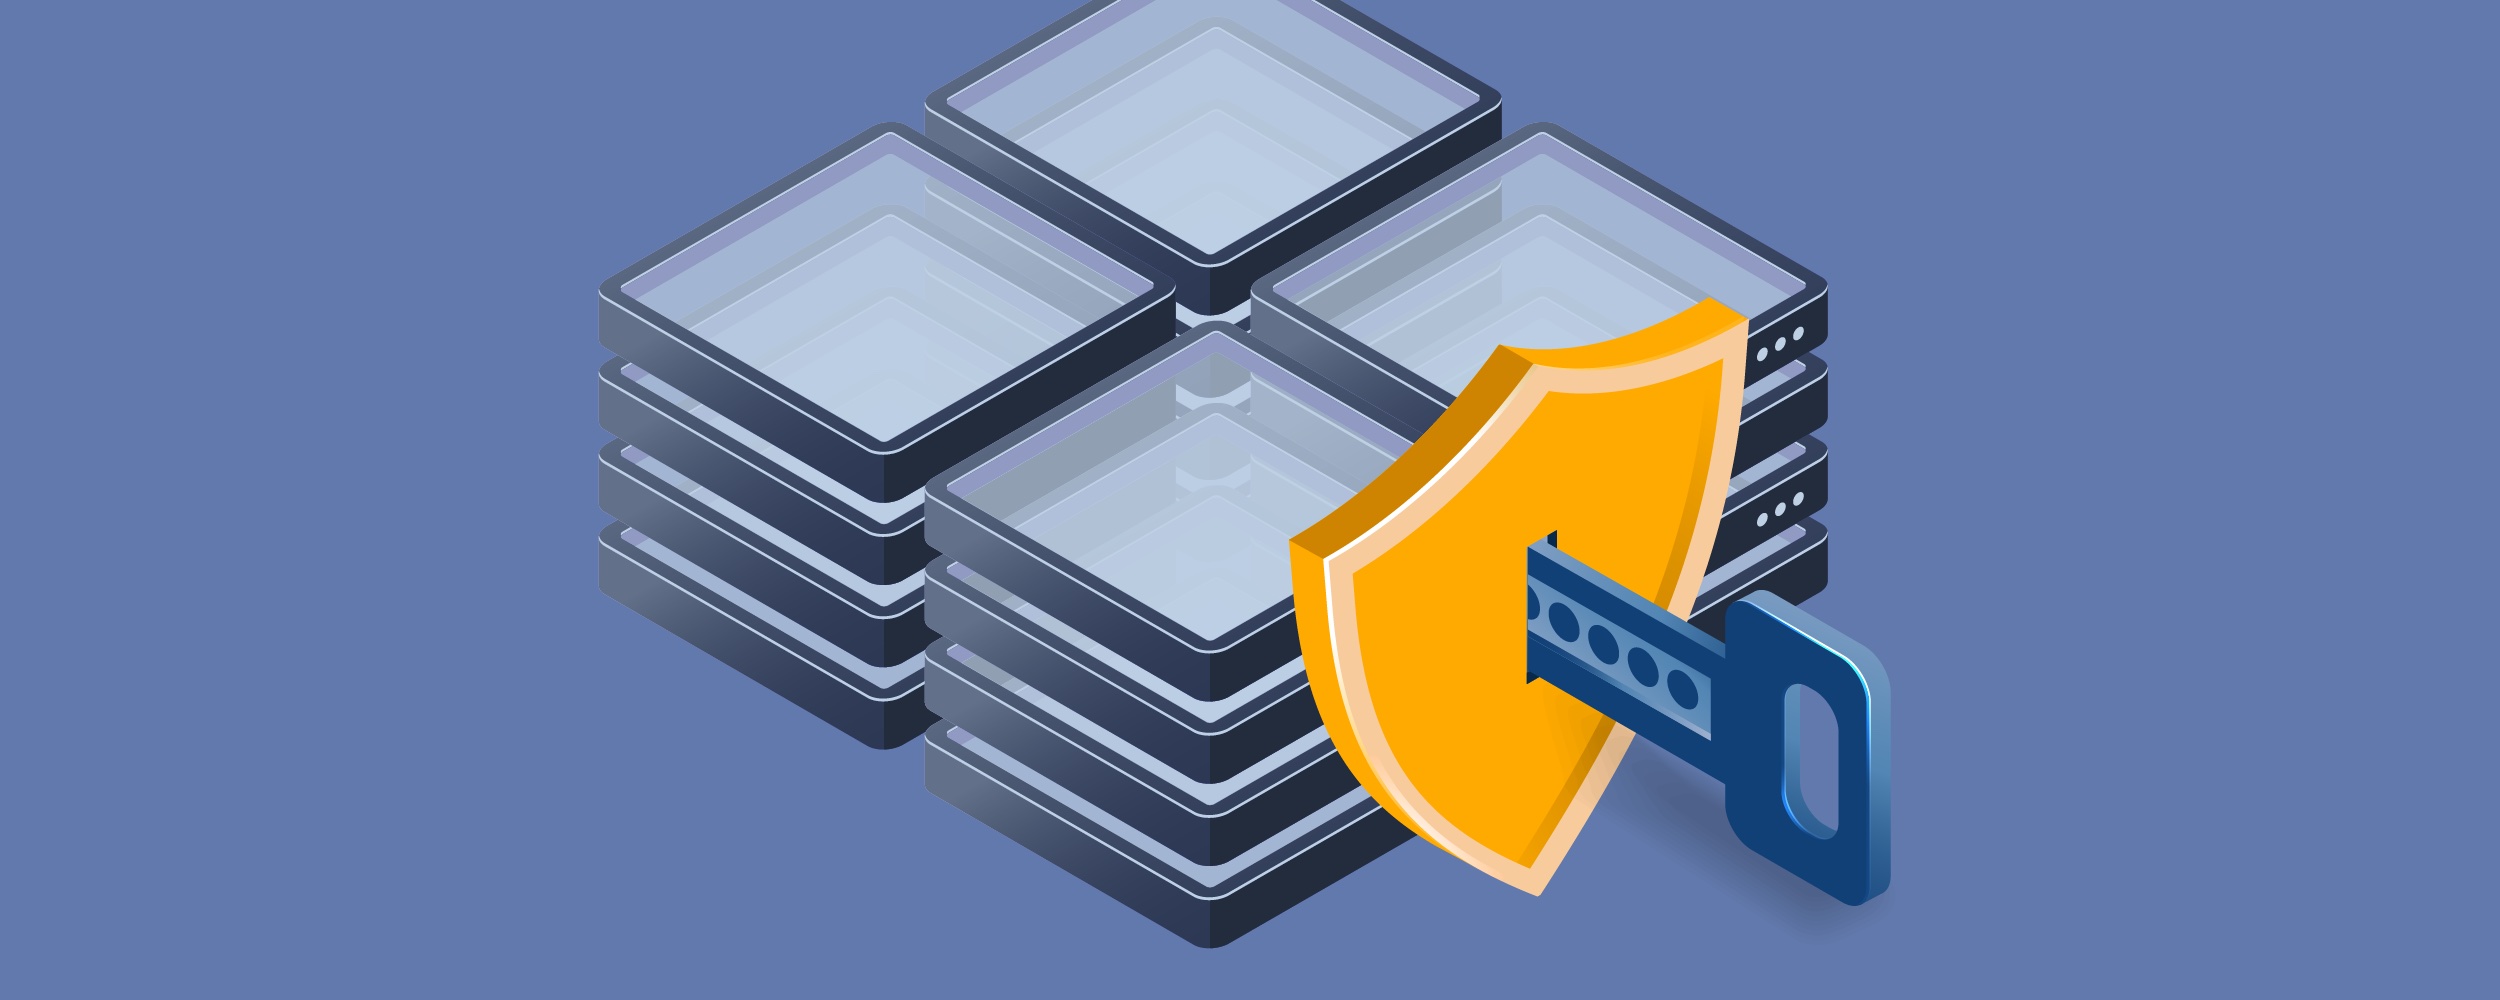 File Server security (Part 3) – Securing your Windows File Servers